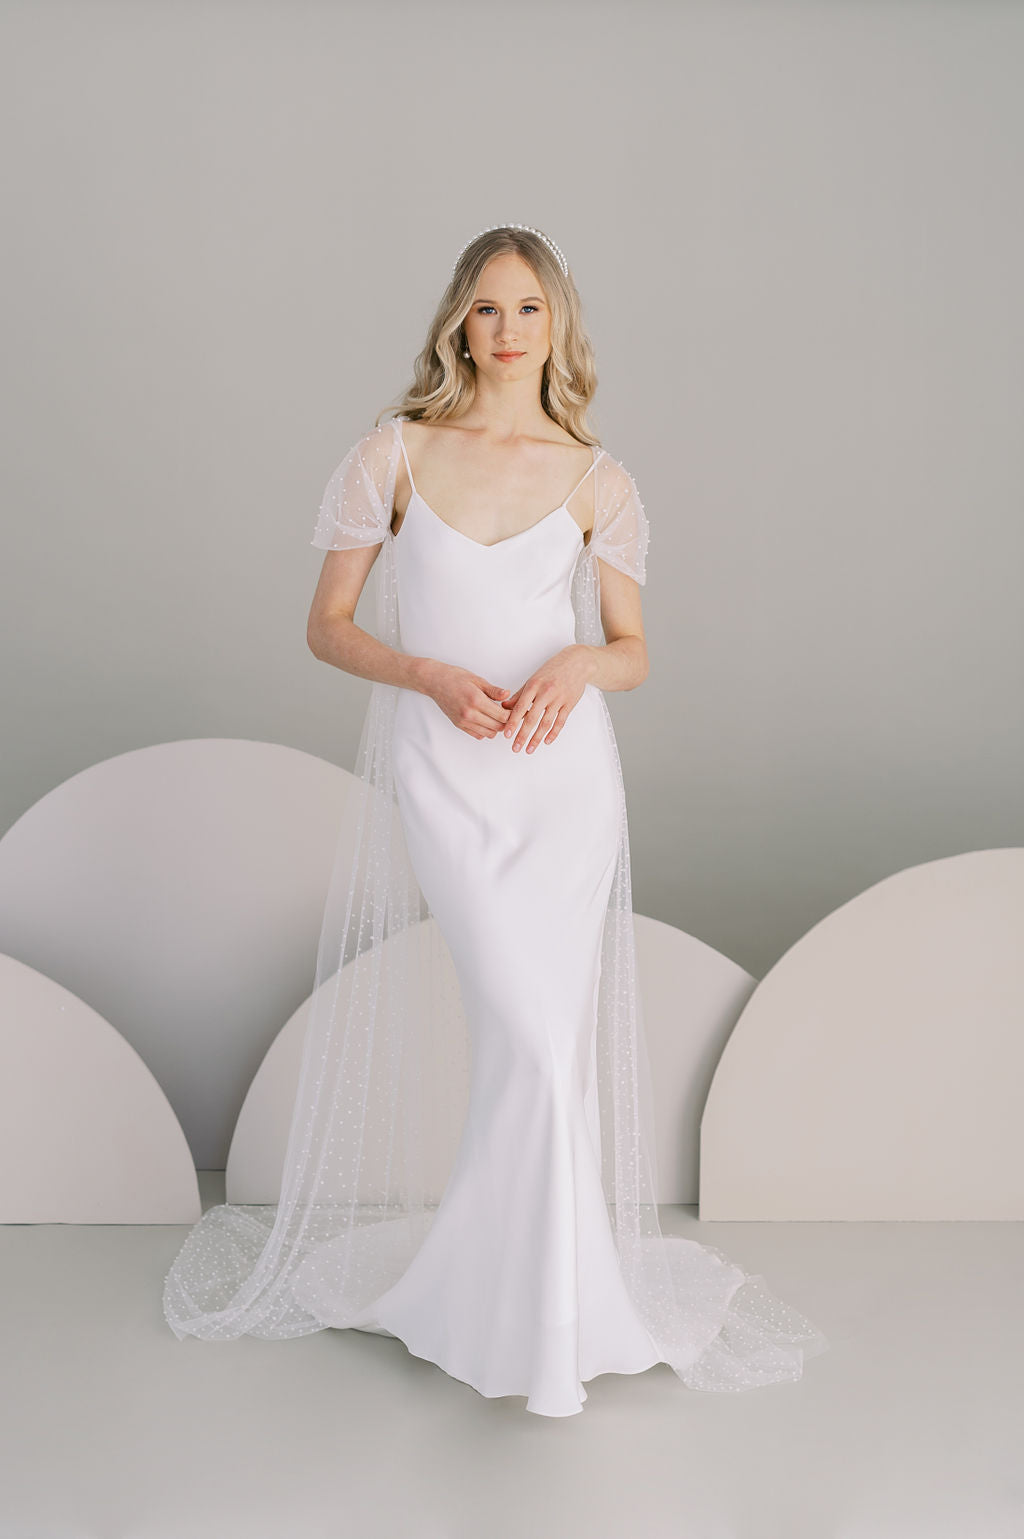 Long pearl bridal cape. Handmade by Catherine Langlois, Toronto, Canada.